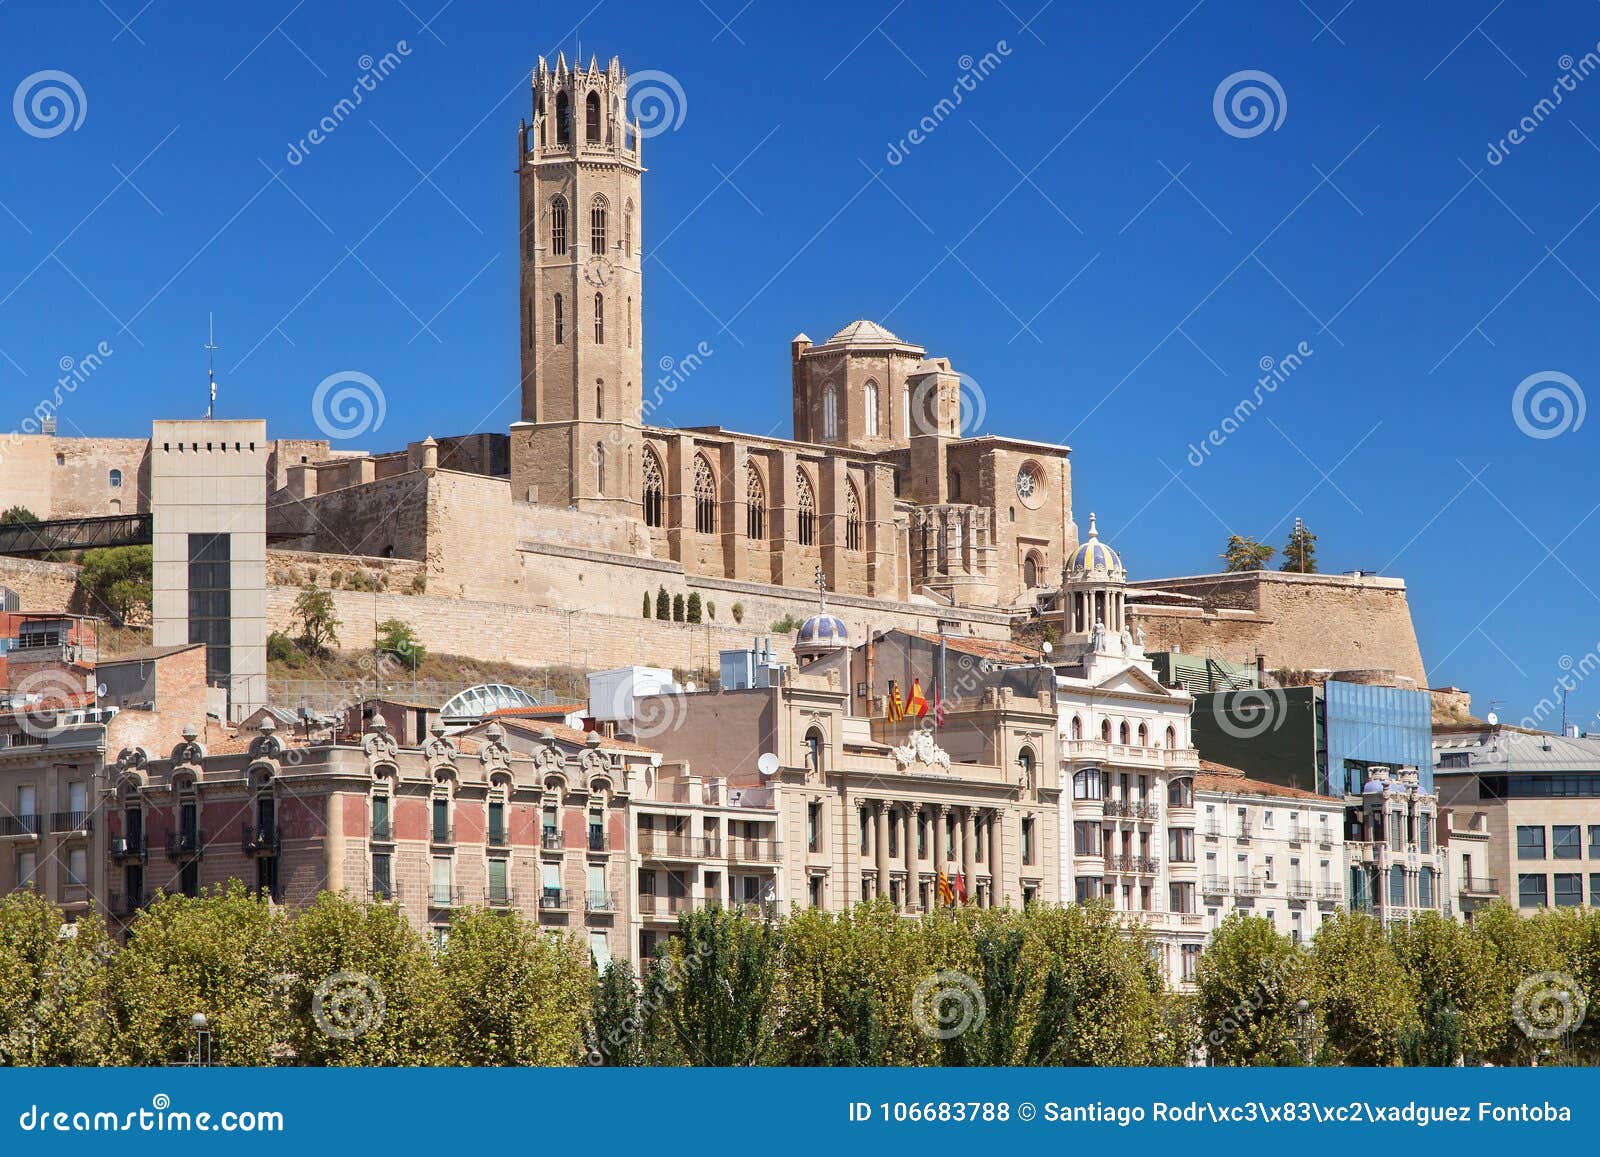 old cathedral of lleida